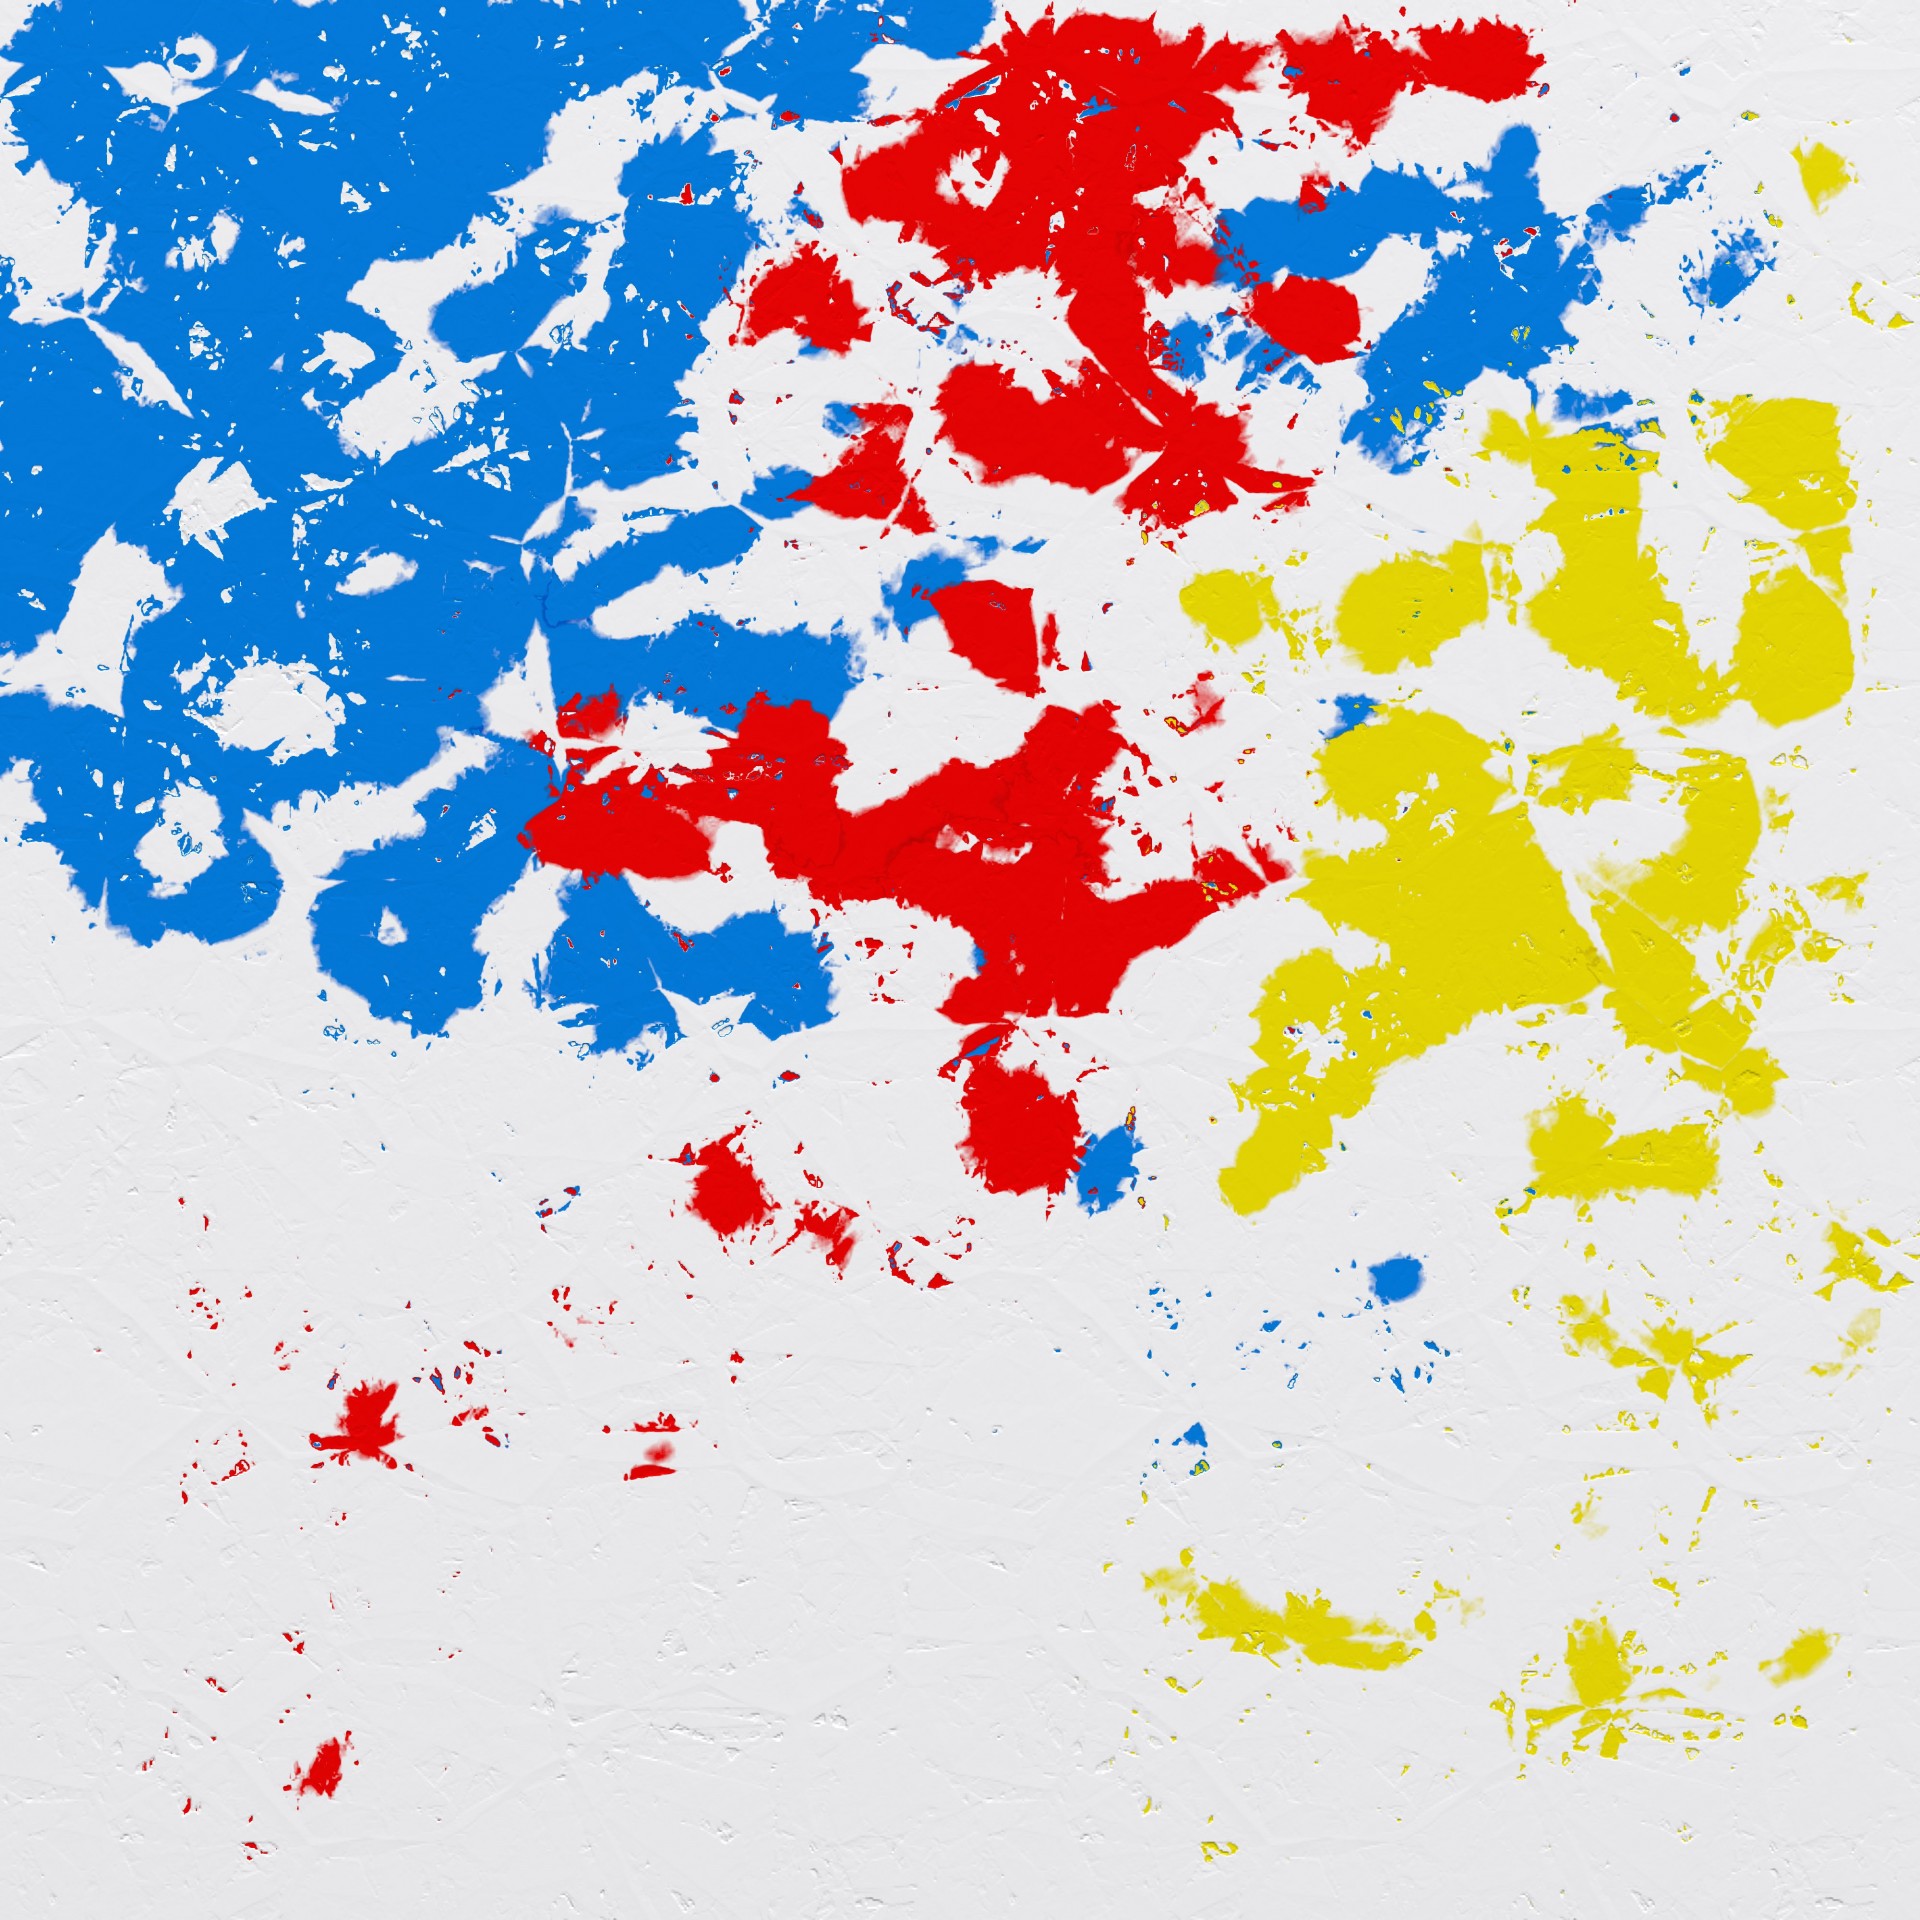 Digitally created blue, red and yellow splattering of paint on a white background.